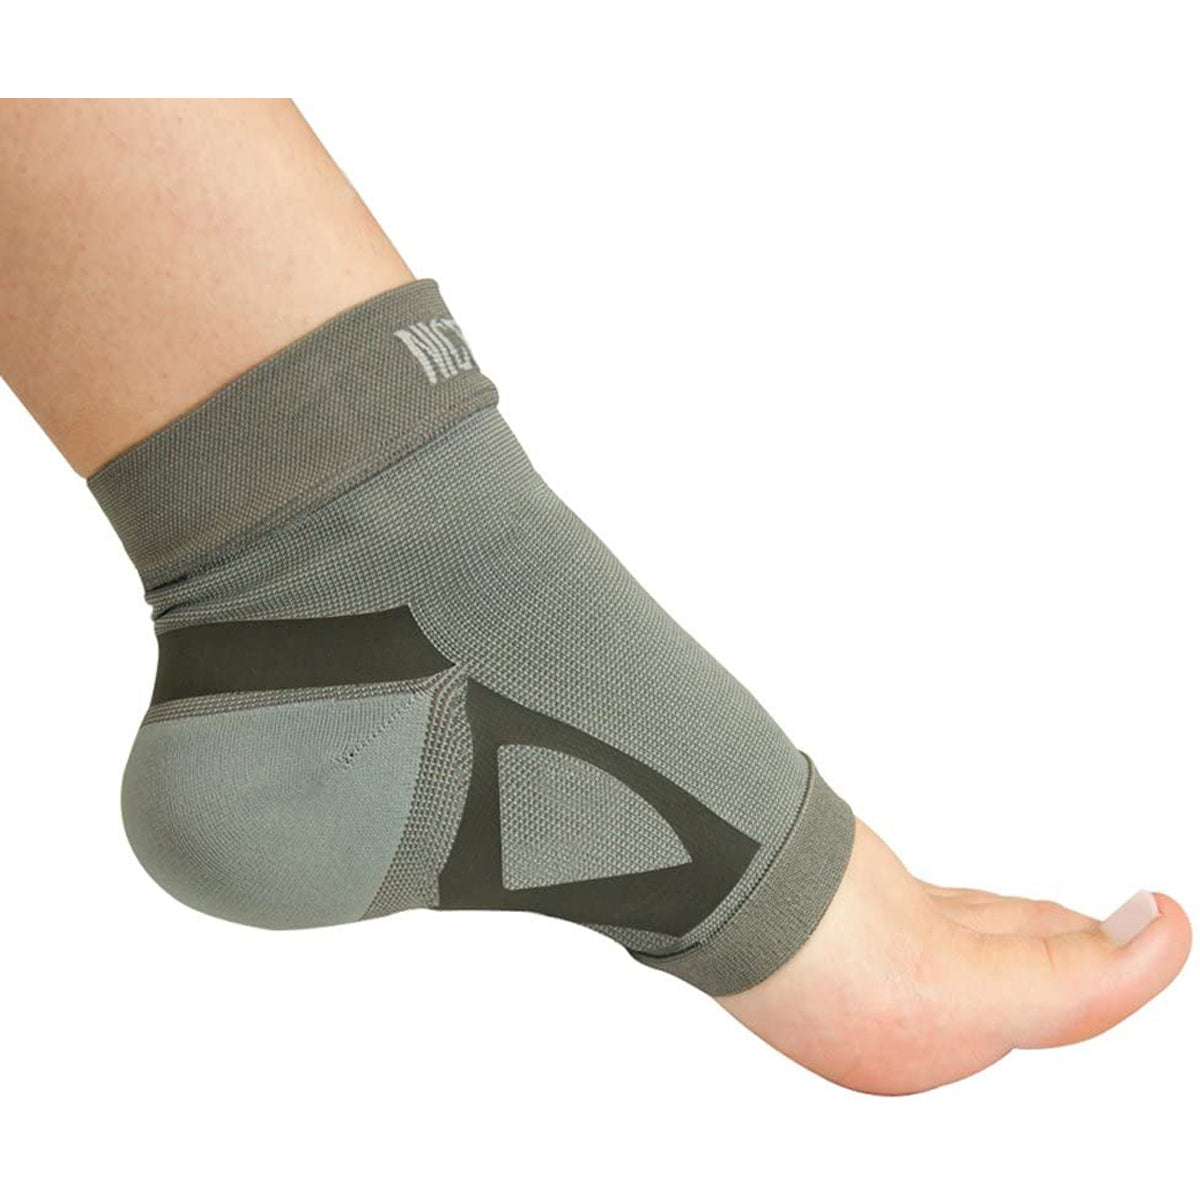 Nice Stretch Total Solution Plantar Fasciitis Relief Kit, Provides 24-hr Support Nice Stretch